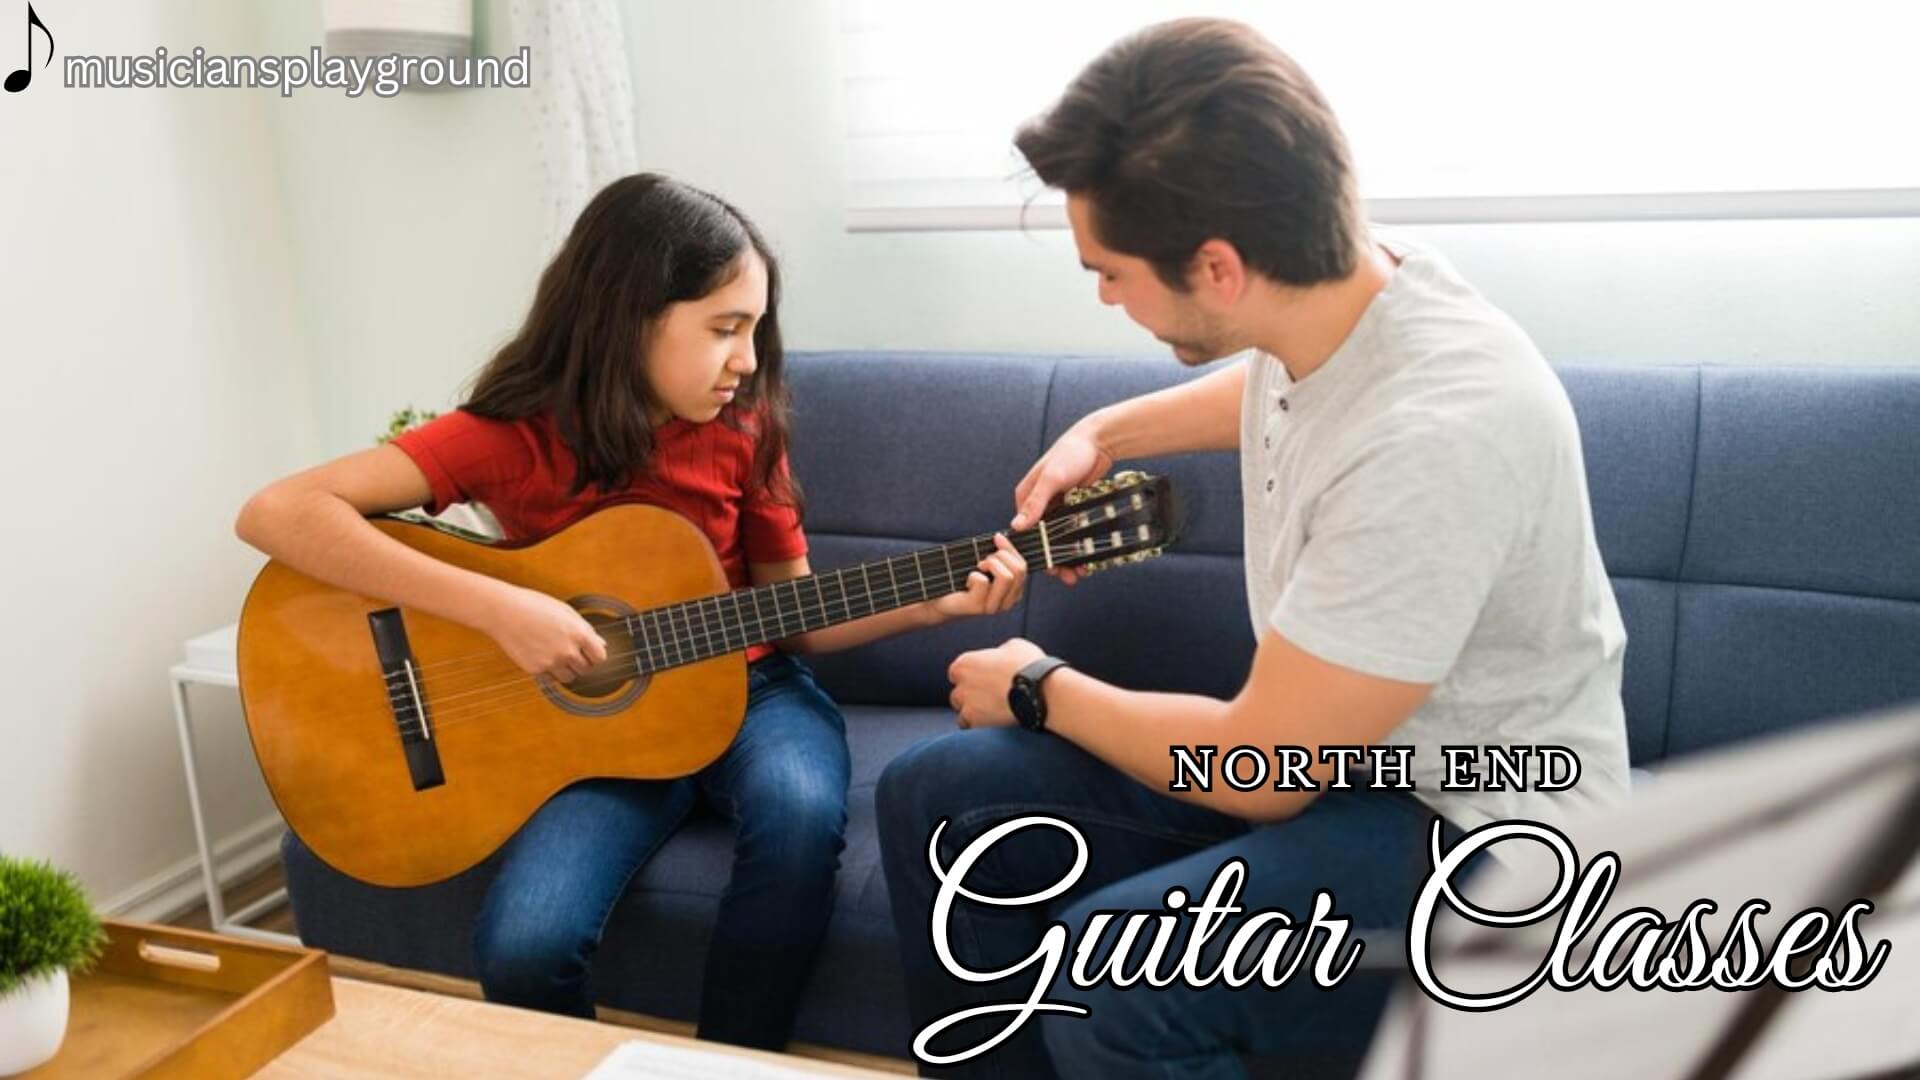 Welcome to Guitar Classes in North End, Massachusetts